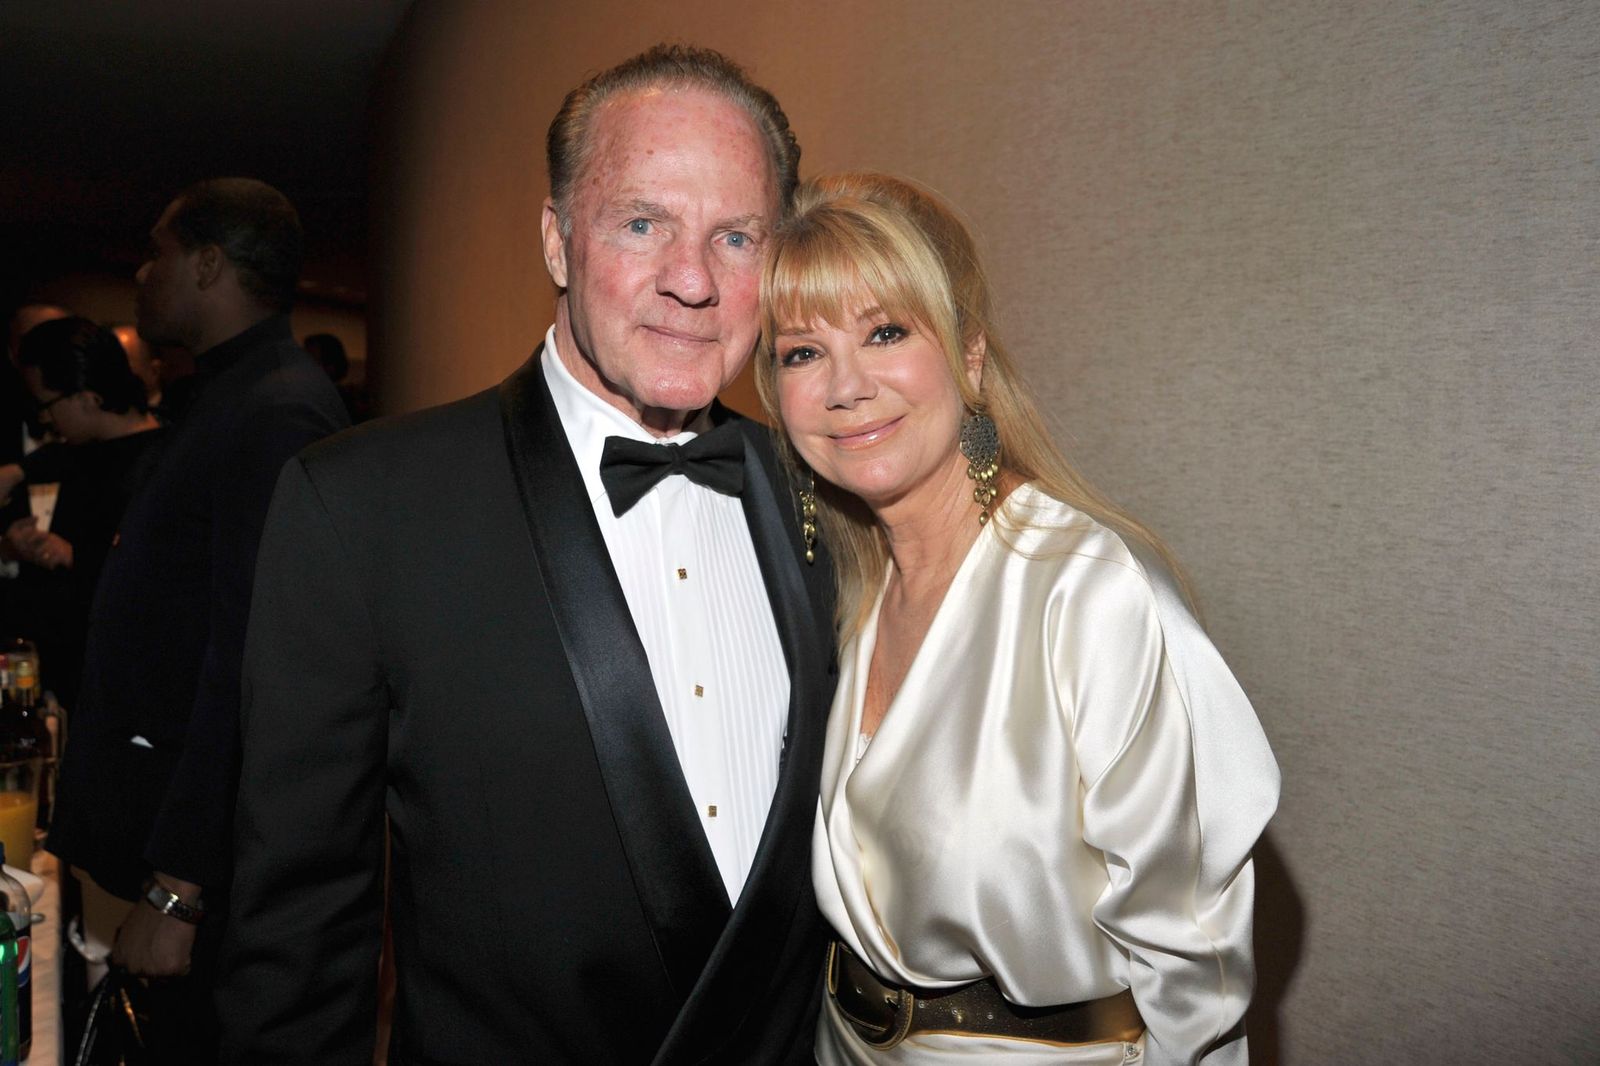 Frank Gifford and Kathie Lee Gifford at Literacy Partners Evening of Readings Gala at David H. Koch Theater on May 10th, 2010 | Photo: Getty Images